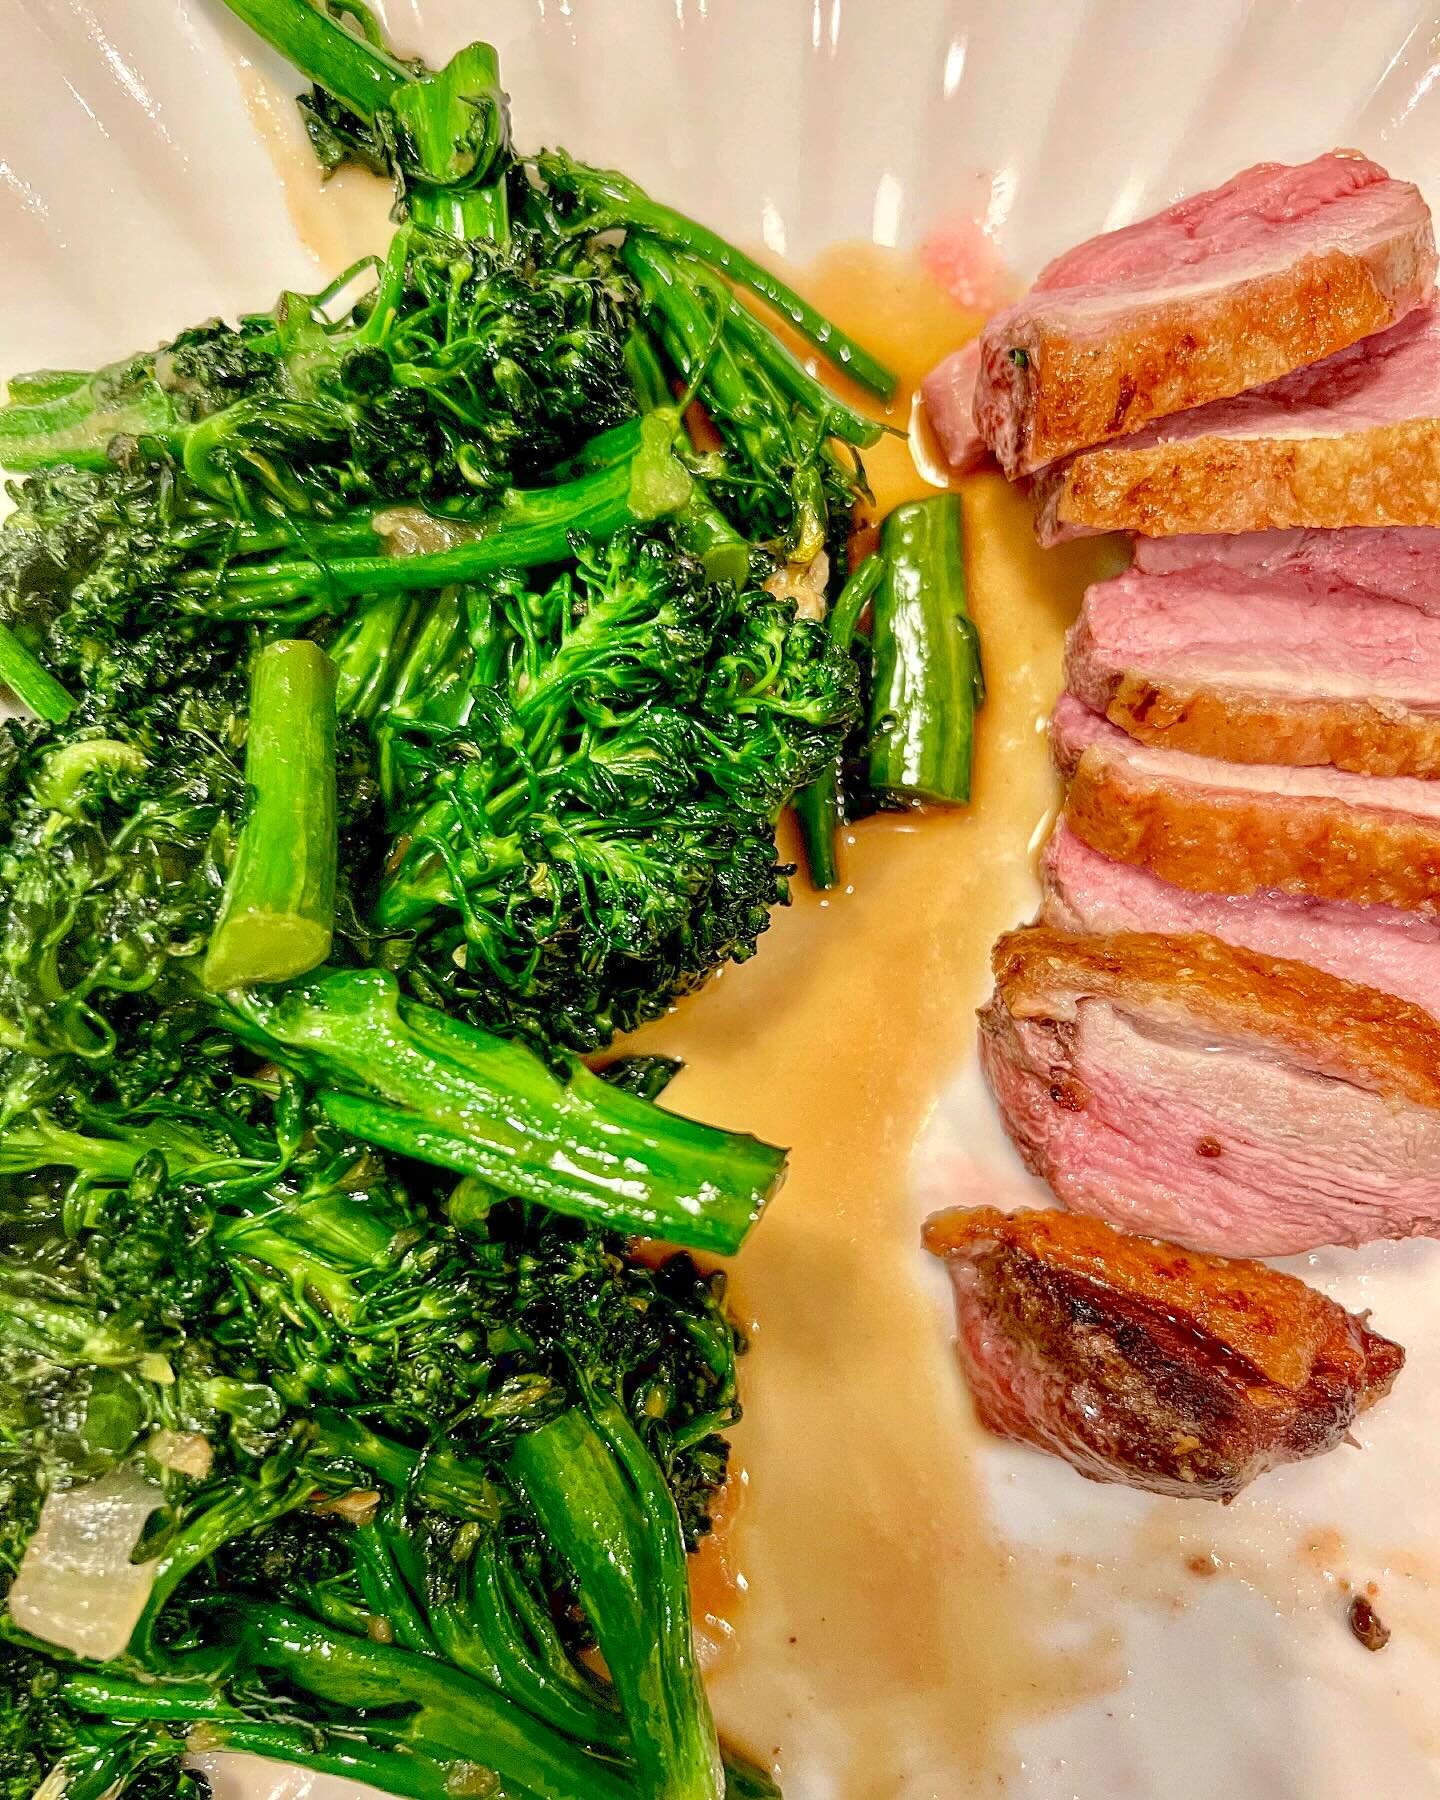 Kate doesn&rsquo;t like duck so when she was skiing I made a simple plate of roasted duck breast with broccoli cooked with garlic, duck fat, soy and oyster sauce. #duck #roasting #cookingforone #globalpantrycookbook